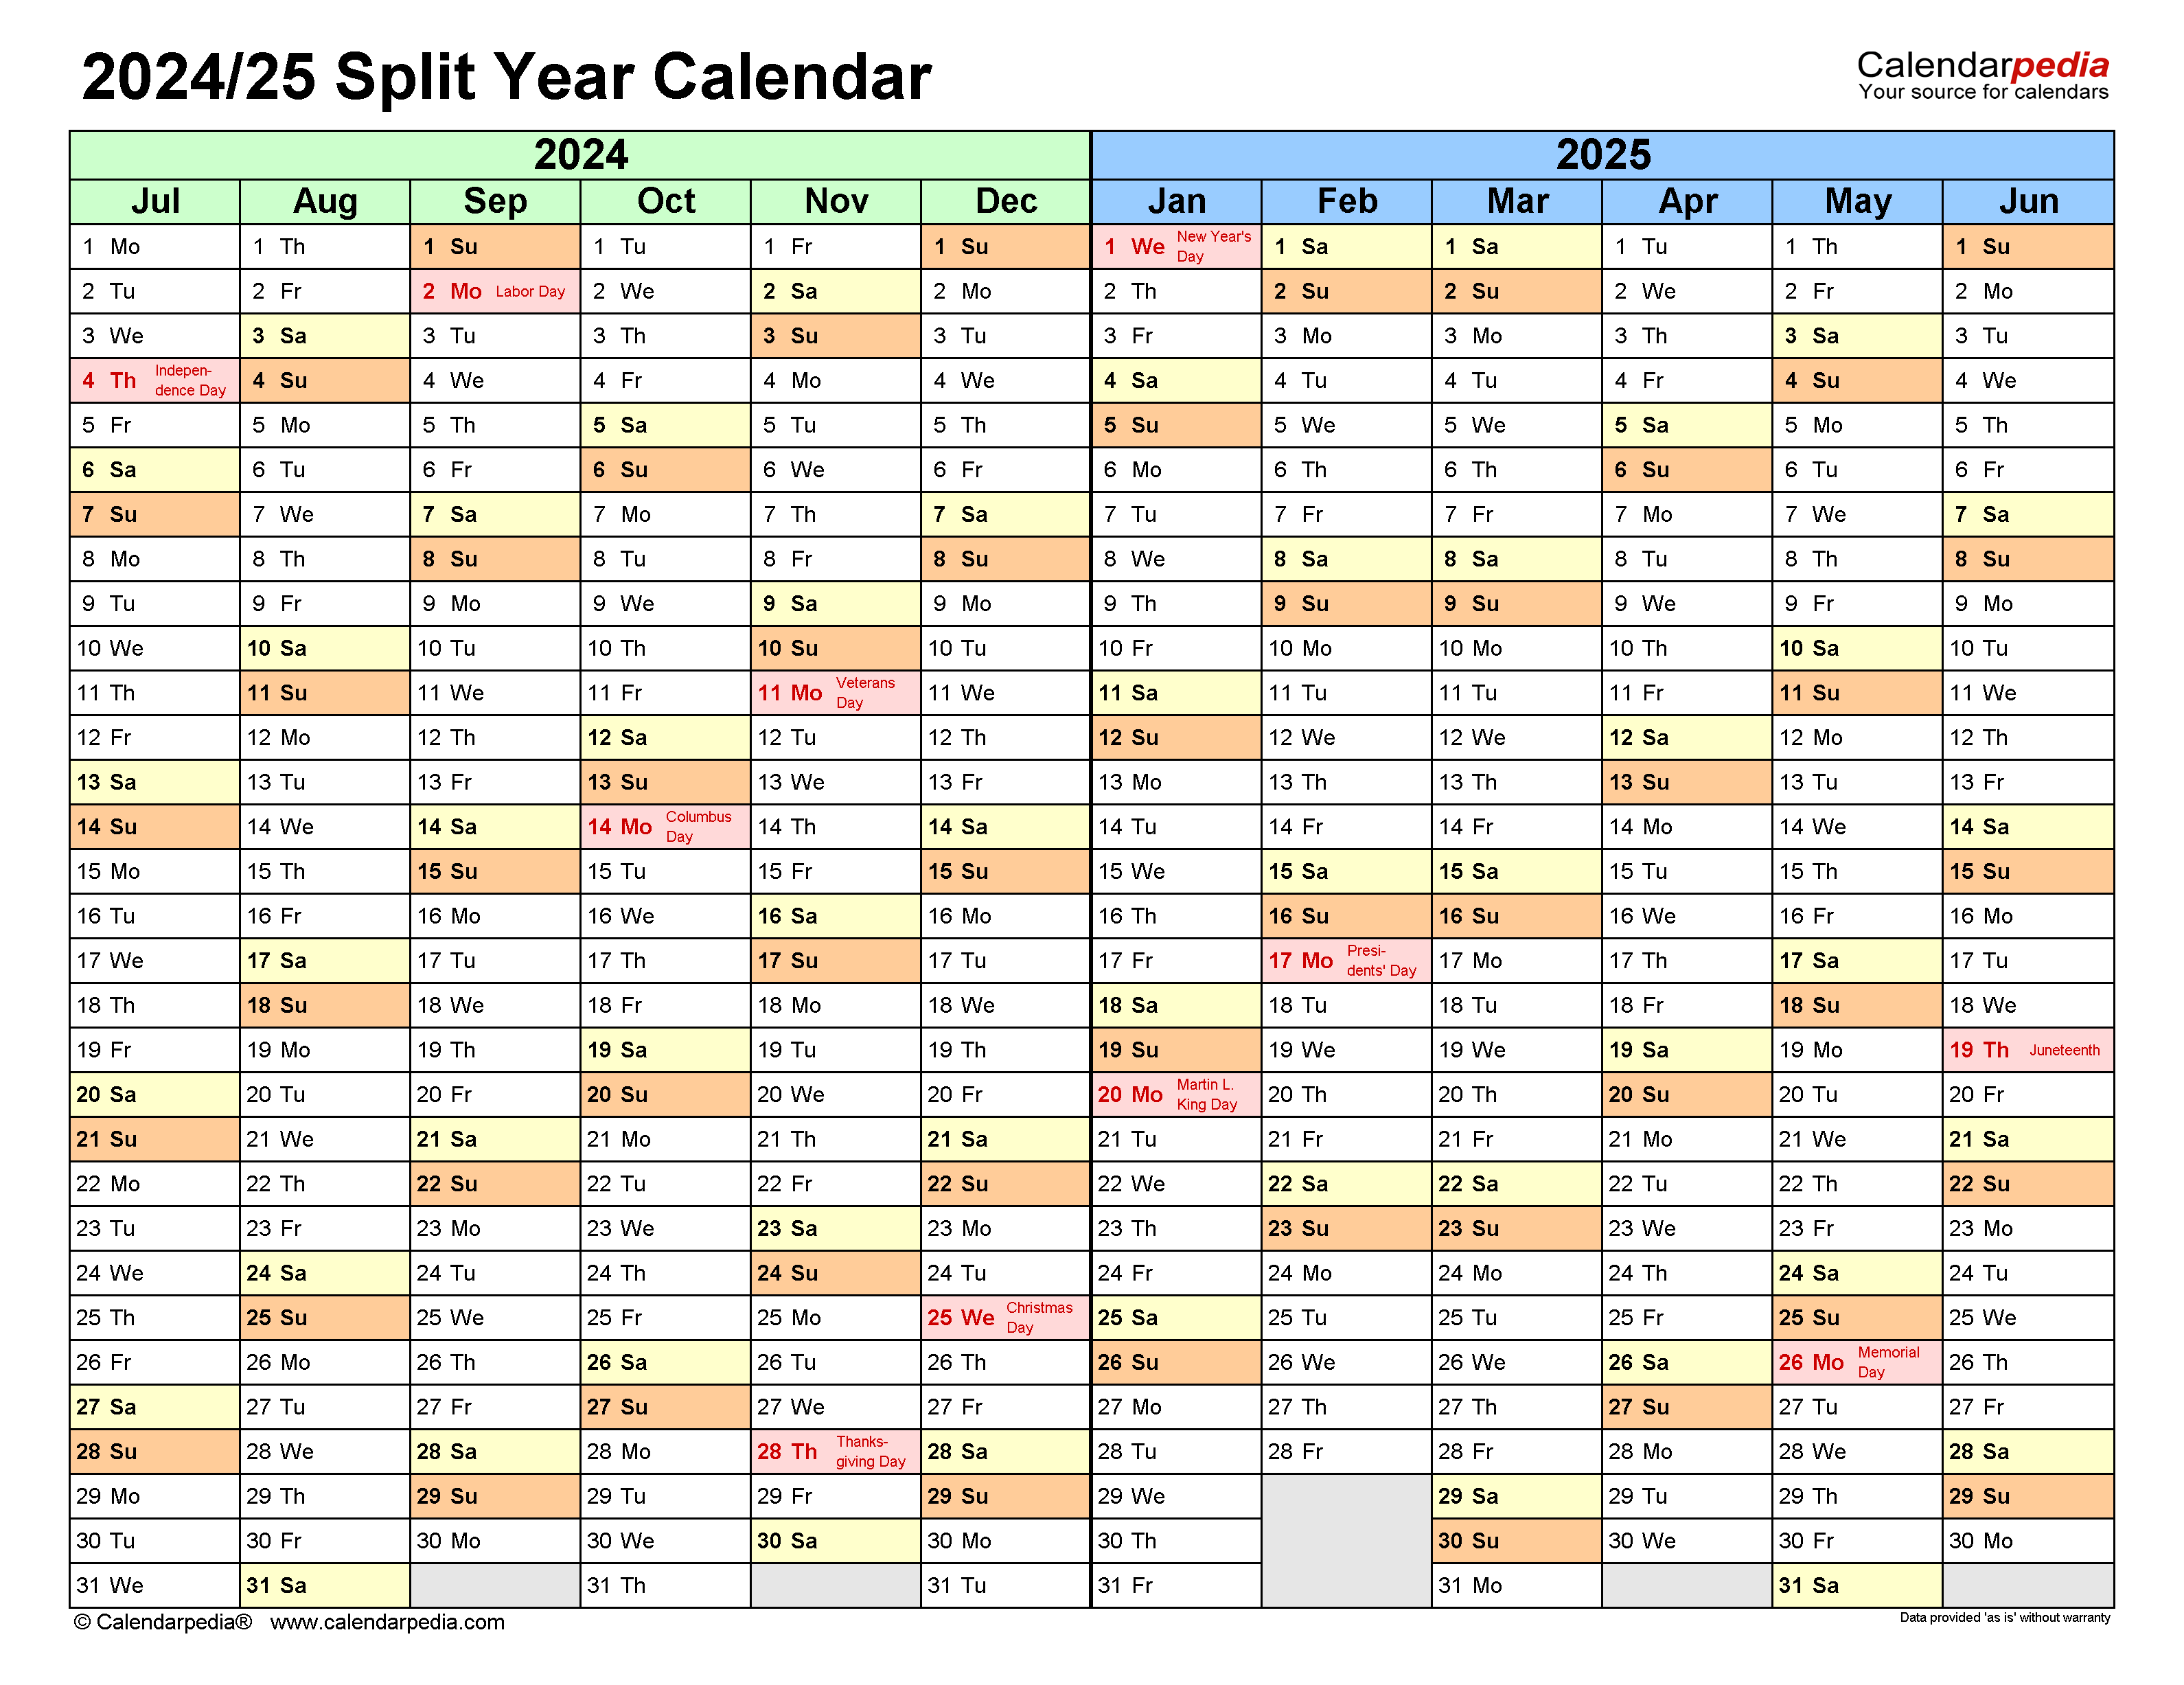 Split Year Calendars 2024/2025 (July To June) - Word Templates intended for June 2024 To December 2025 Calendar